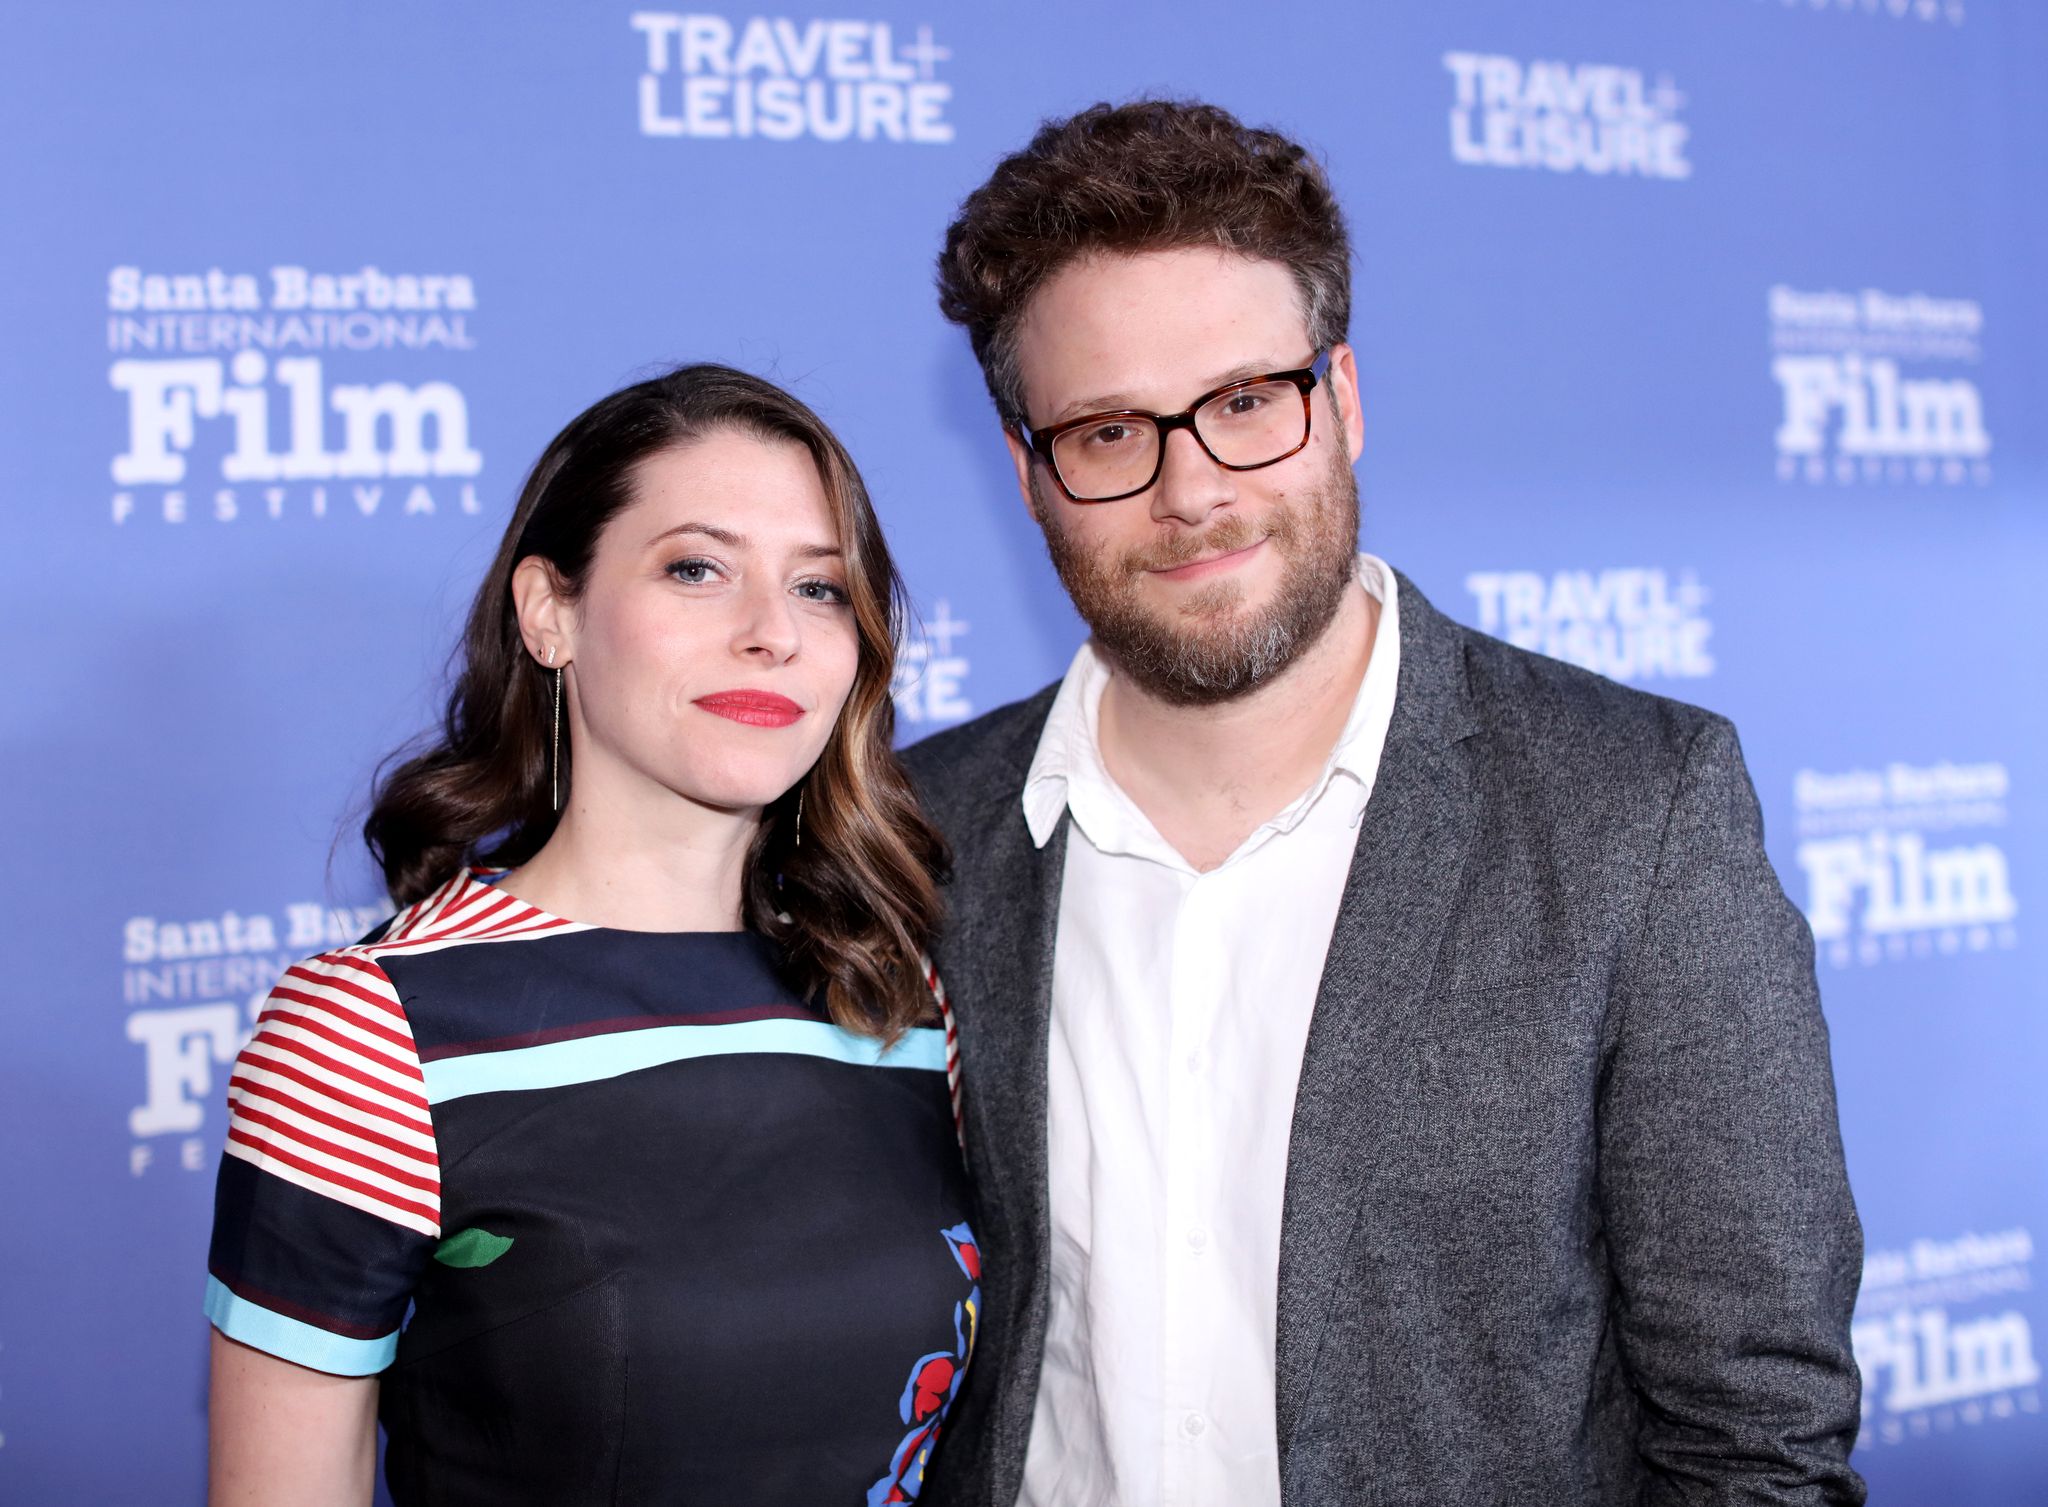 Lauren Miller Rogen and Actor Seth Rogen attend the Virtuosos Awards at the 31st Santa Barbara International Film Festival in 2016 | Source: Getty Images